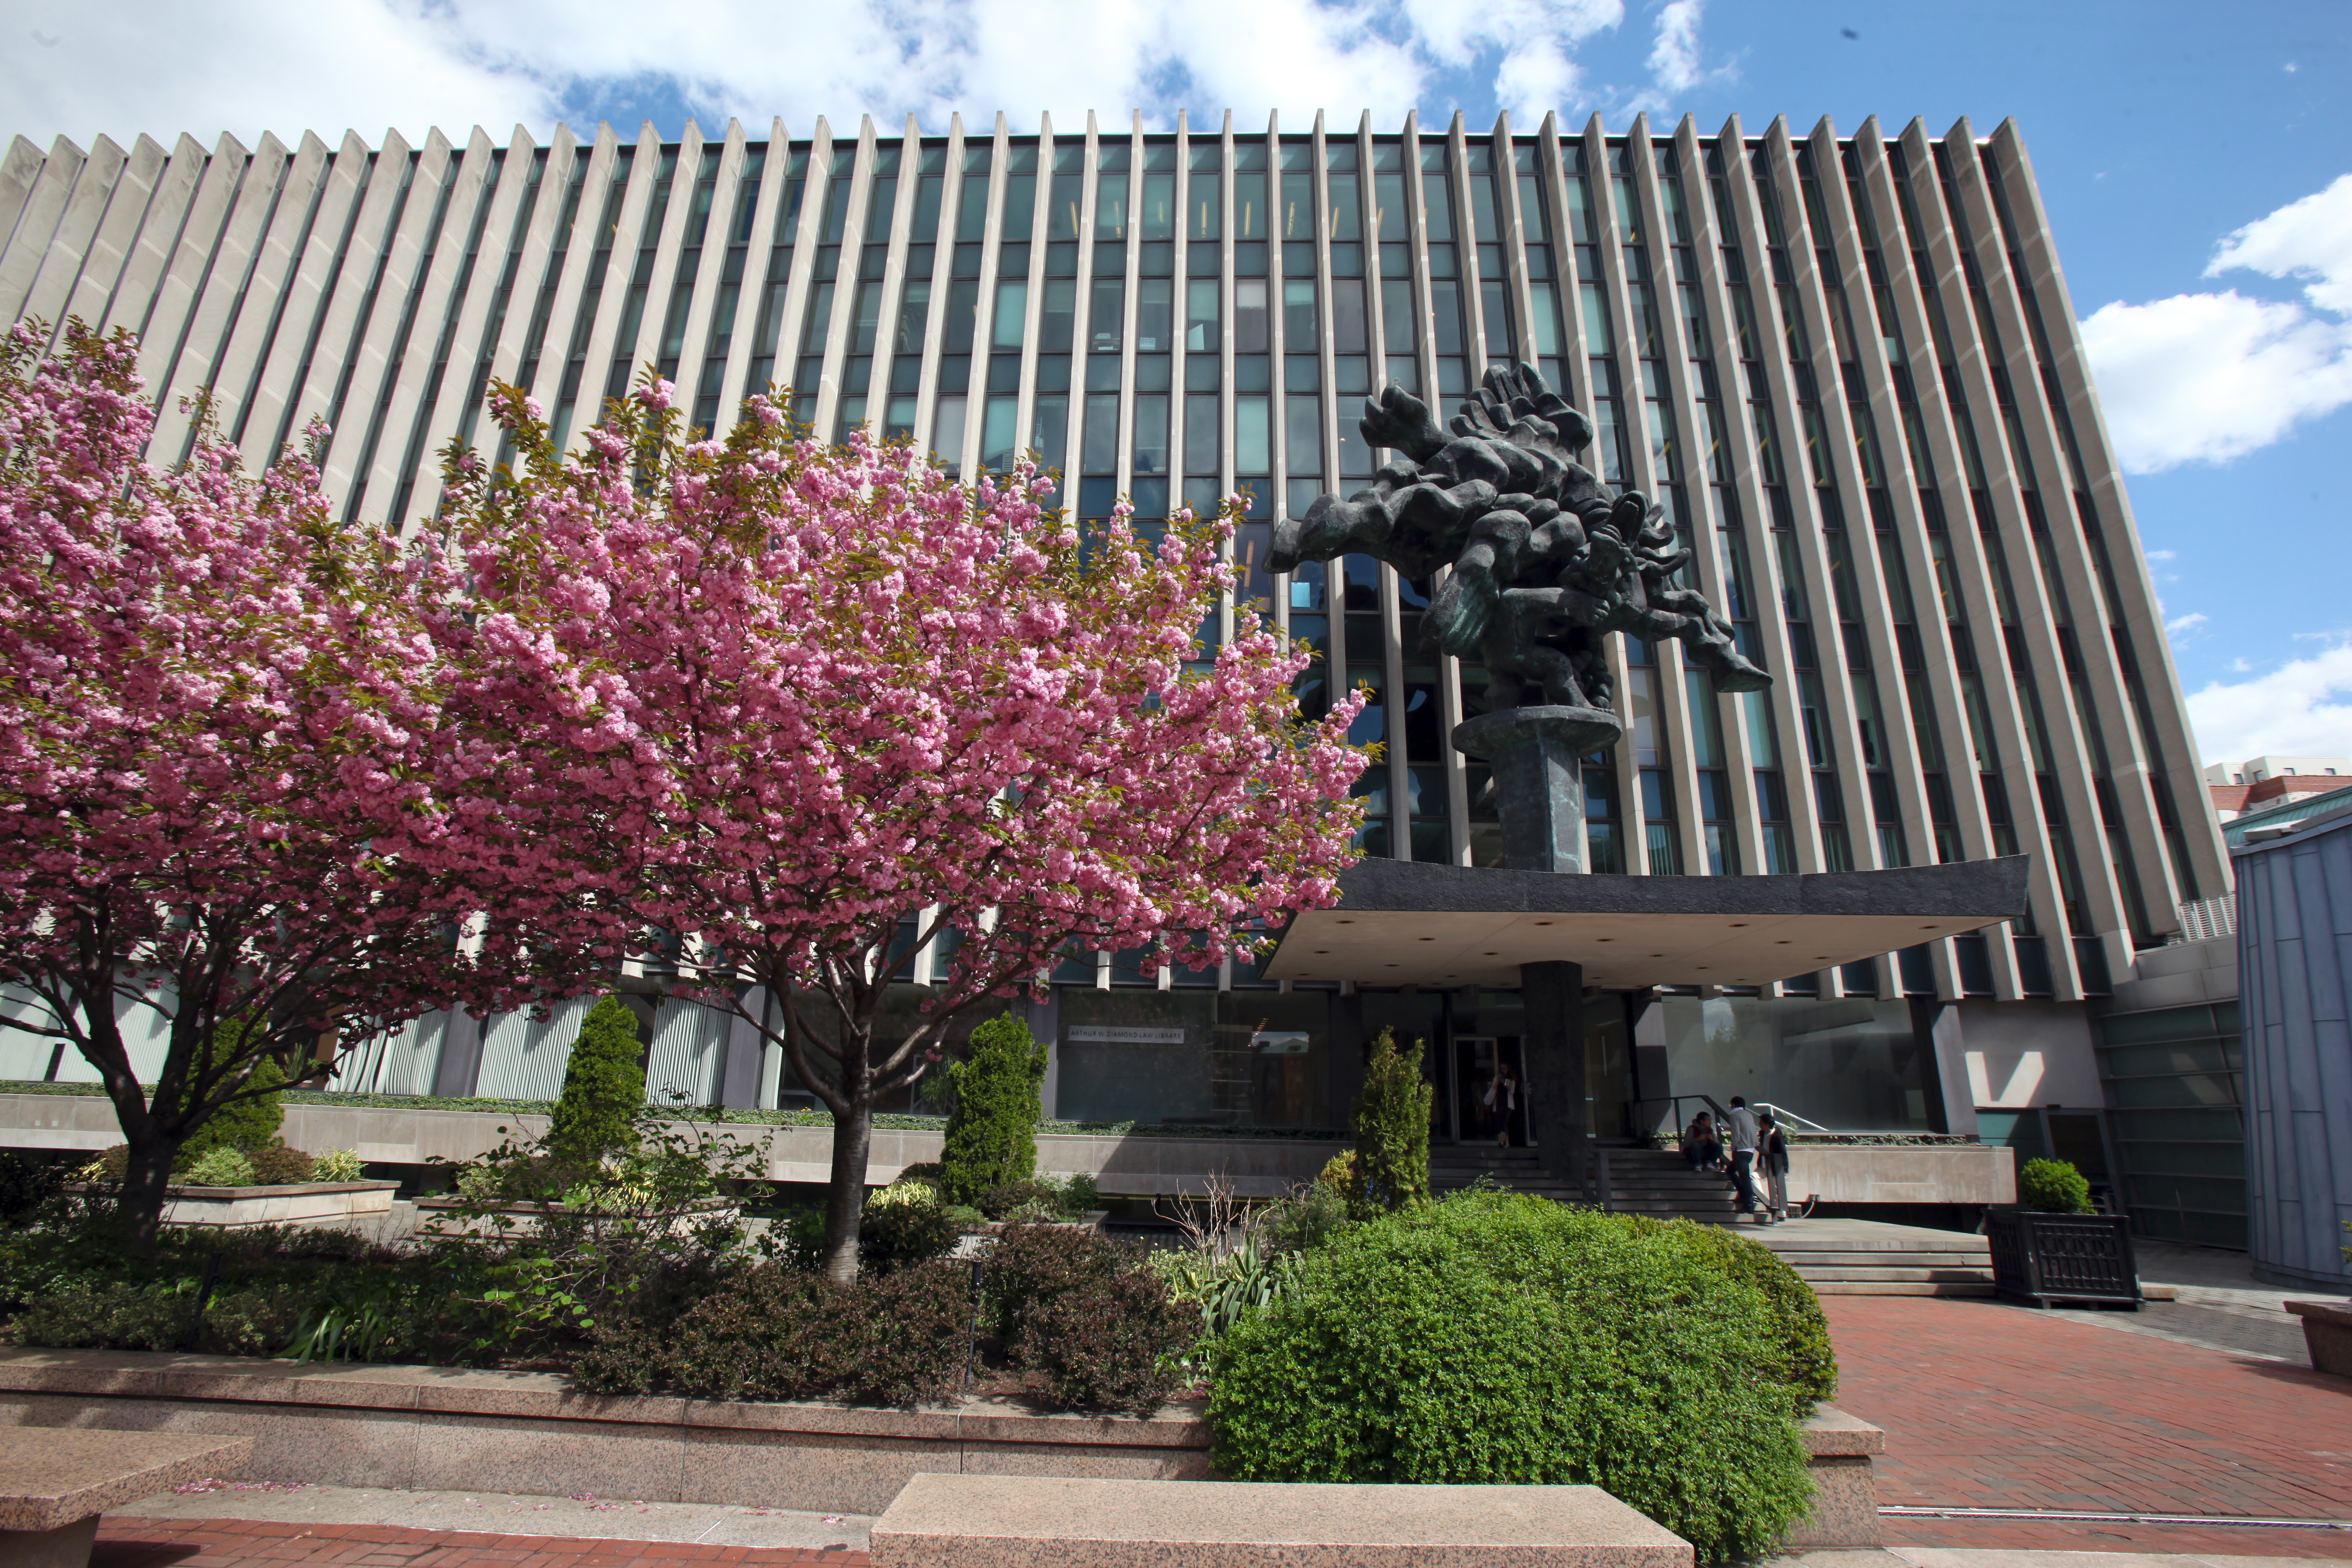 Columbia Law School, behind tress with cherry blossoms in full bloom, and an abstract statue